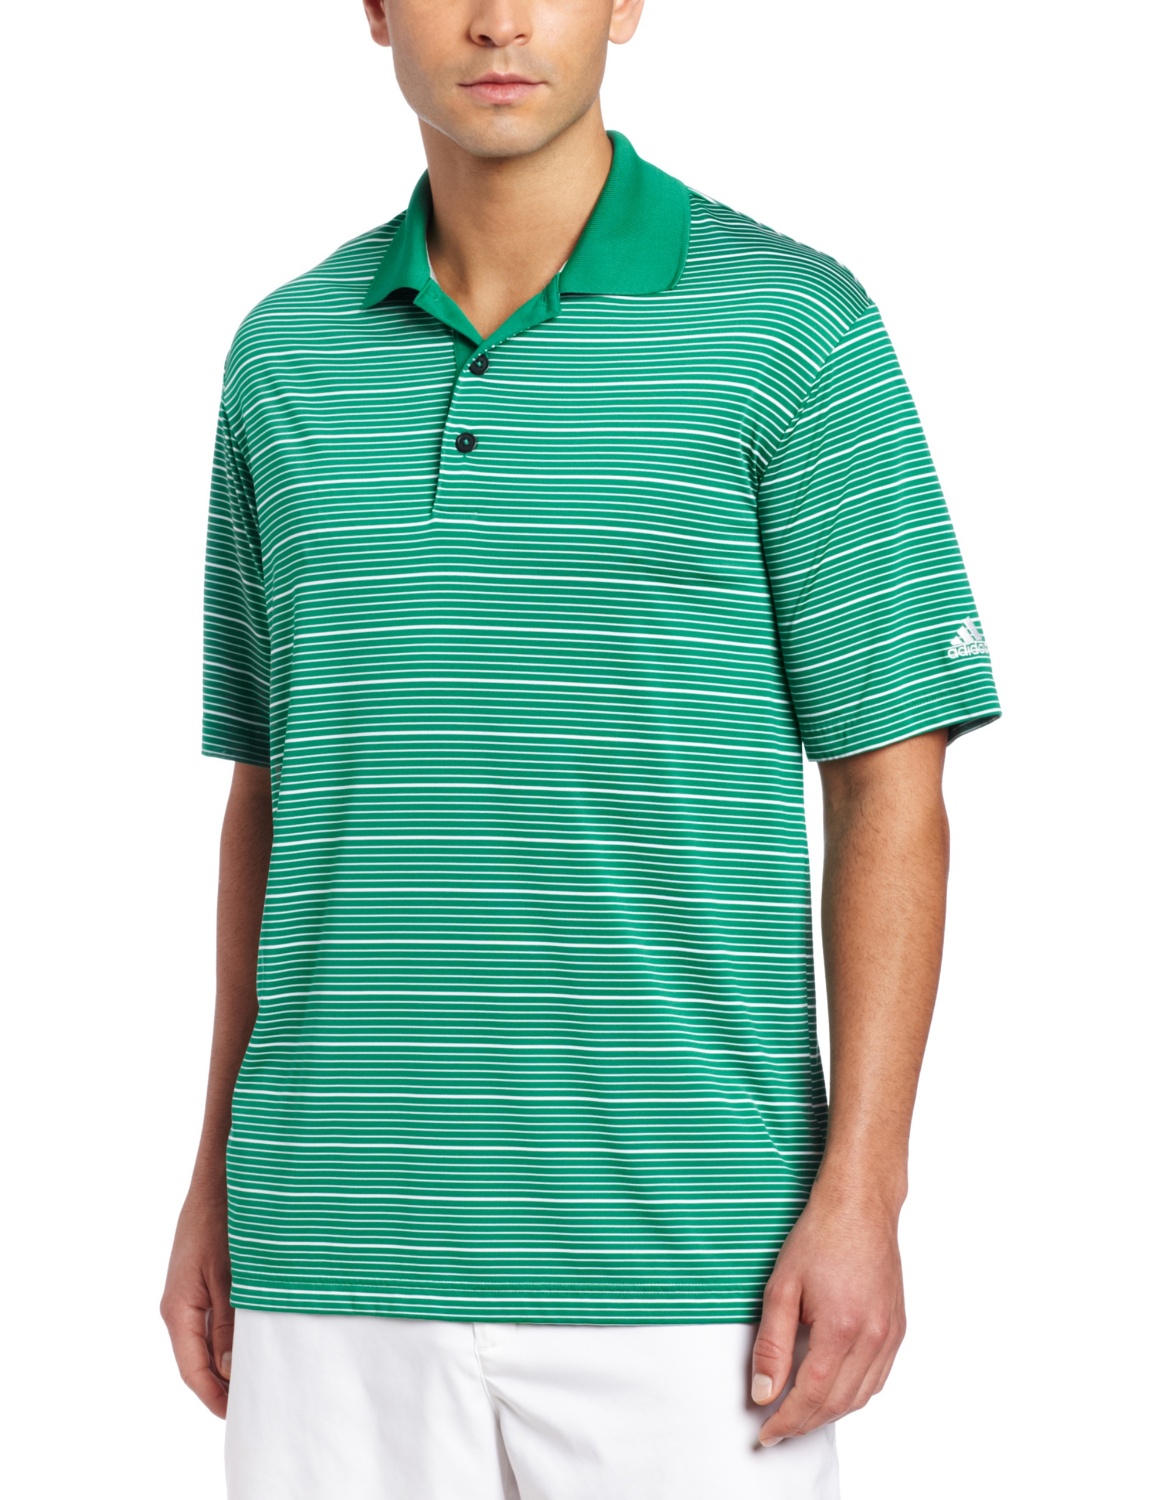 Mens Climalite Two Color Stripe Golf Polo Shirts